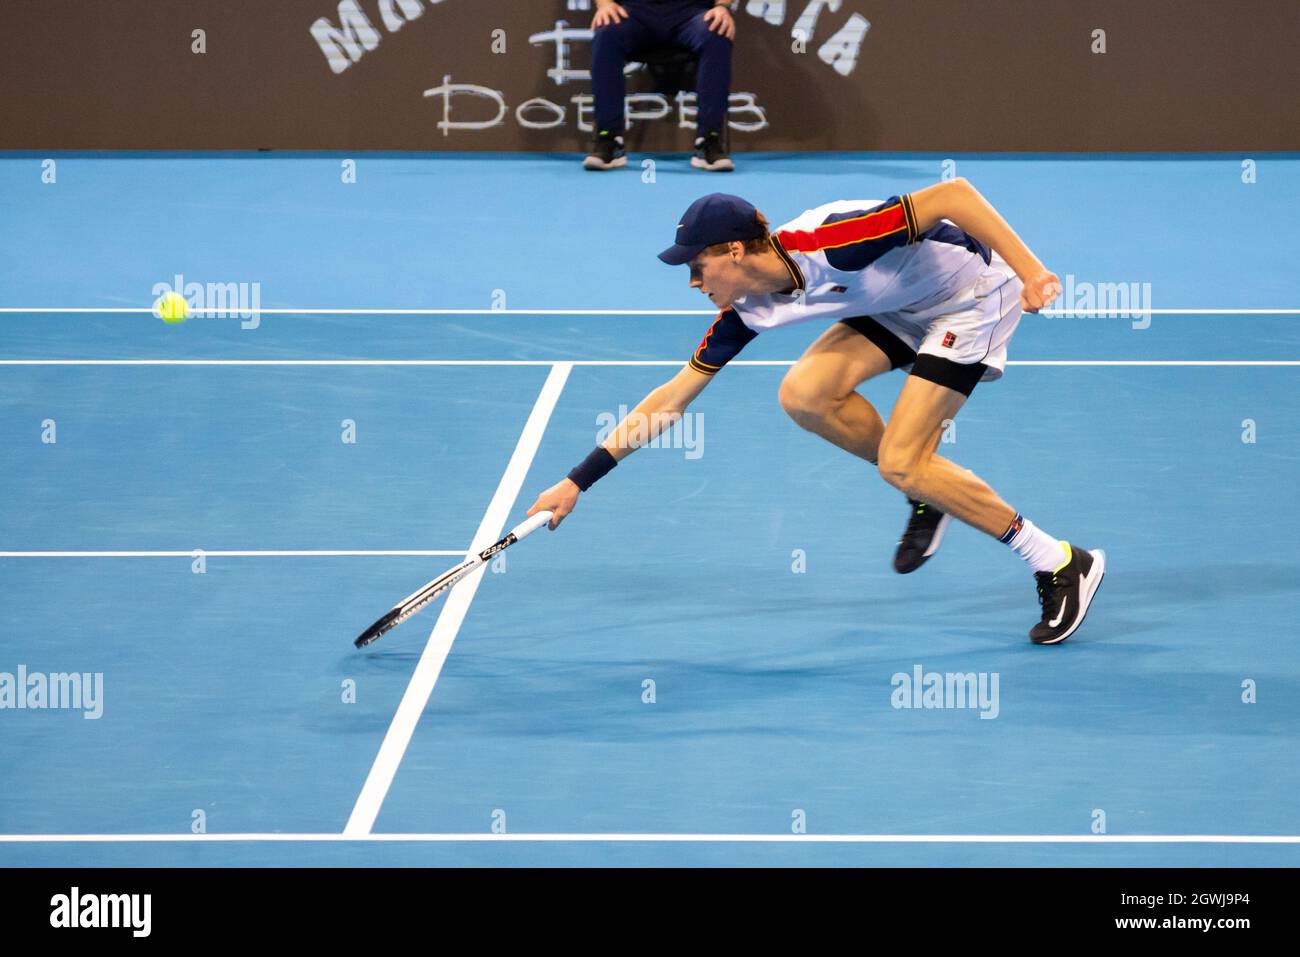 Jannik Sinner of Italy in action against Gael Monfils of France during the men's singles final of the Sofia Open 2021 ATP 250 indoor tennis tournament on hard courts Stock Photo